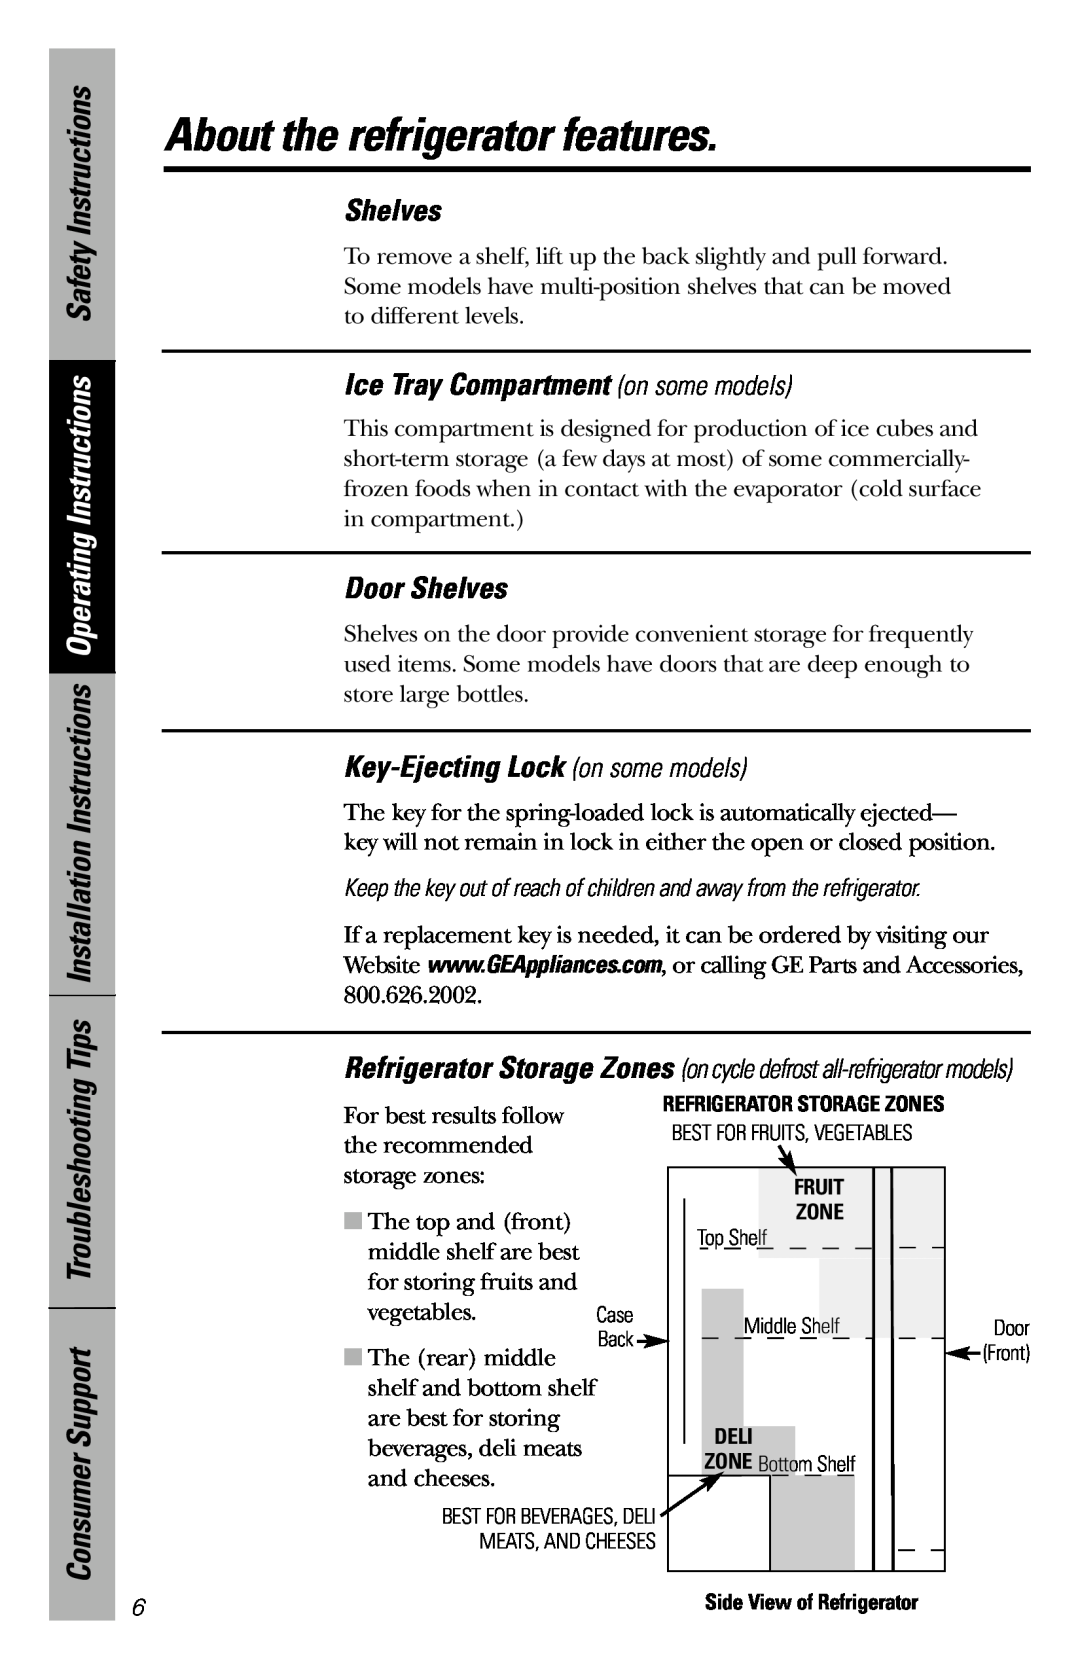 GE 49-60327 owner manual About the refrigerator features, Ice Tray Compartment on some models, Door Shelves 